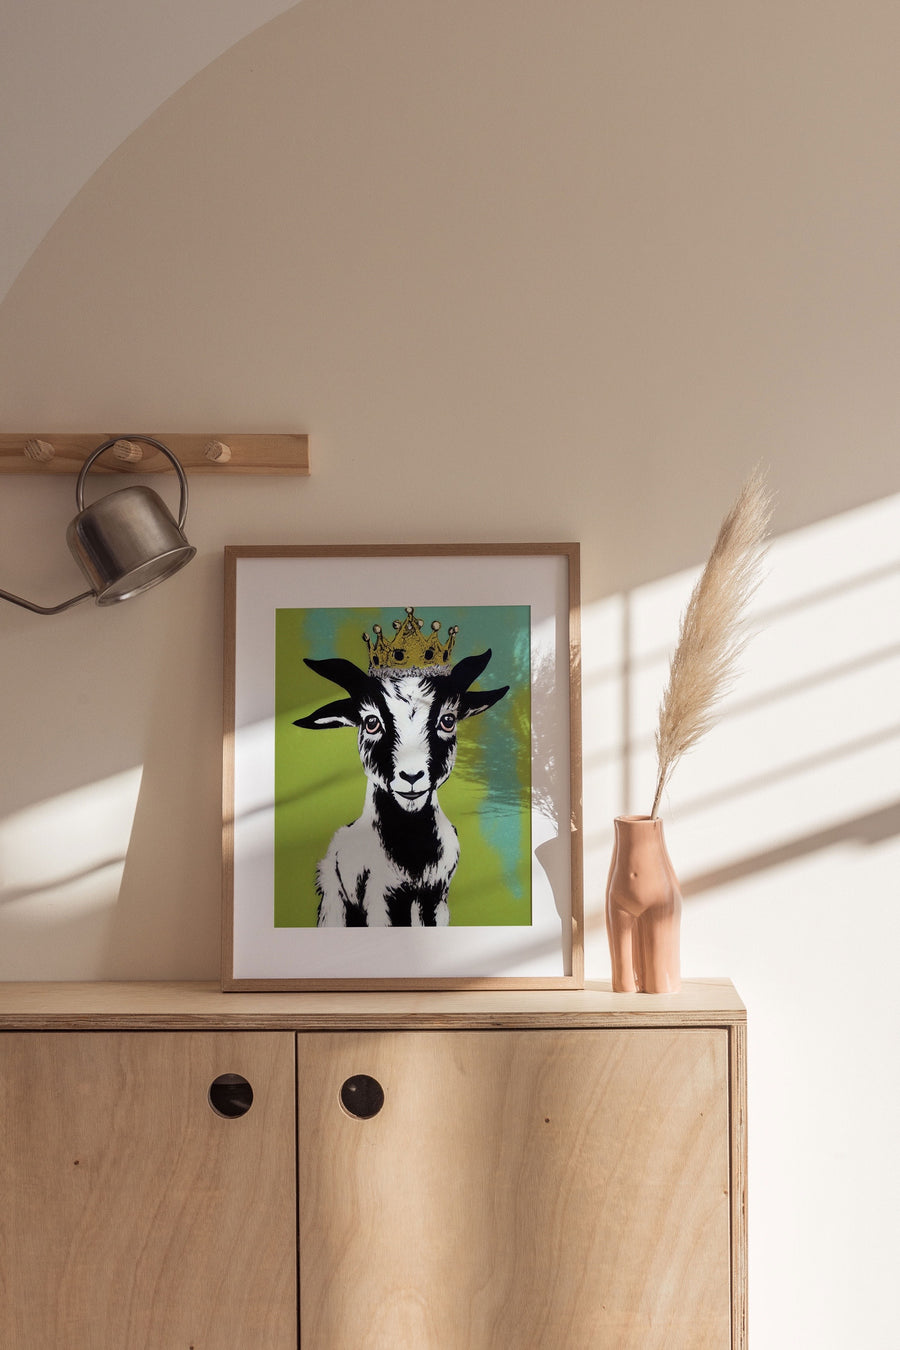 How goat wall art can help bring positive energy to your space